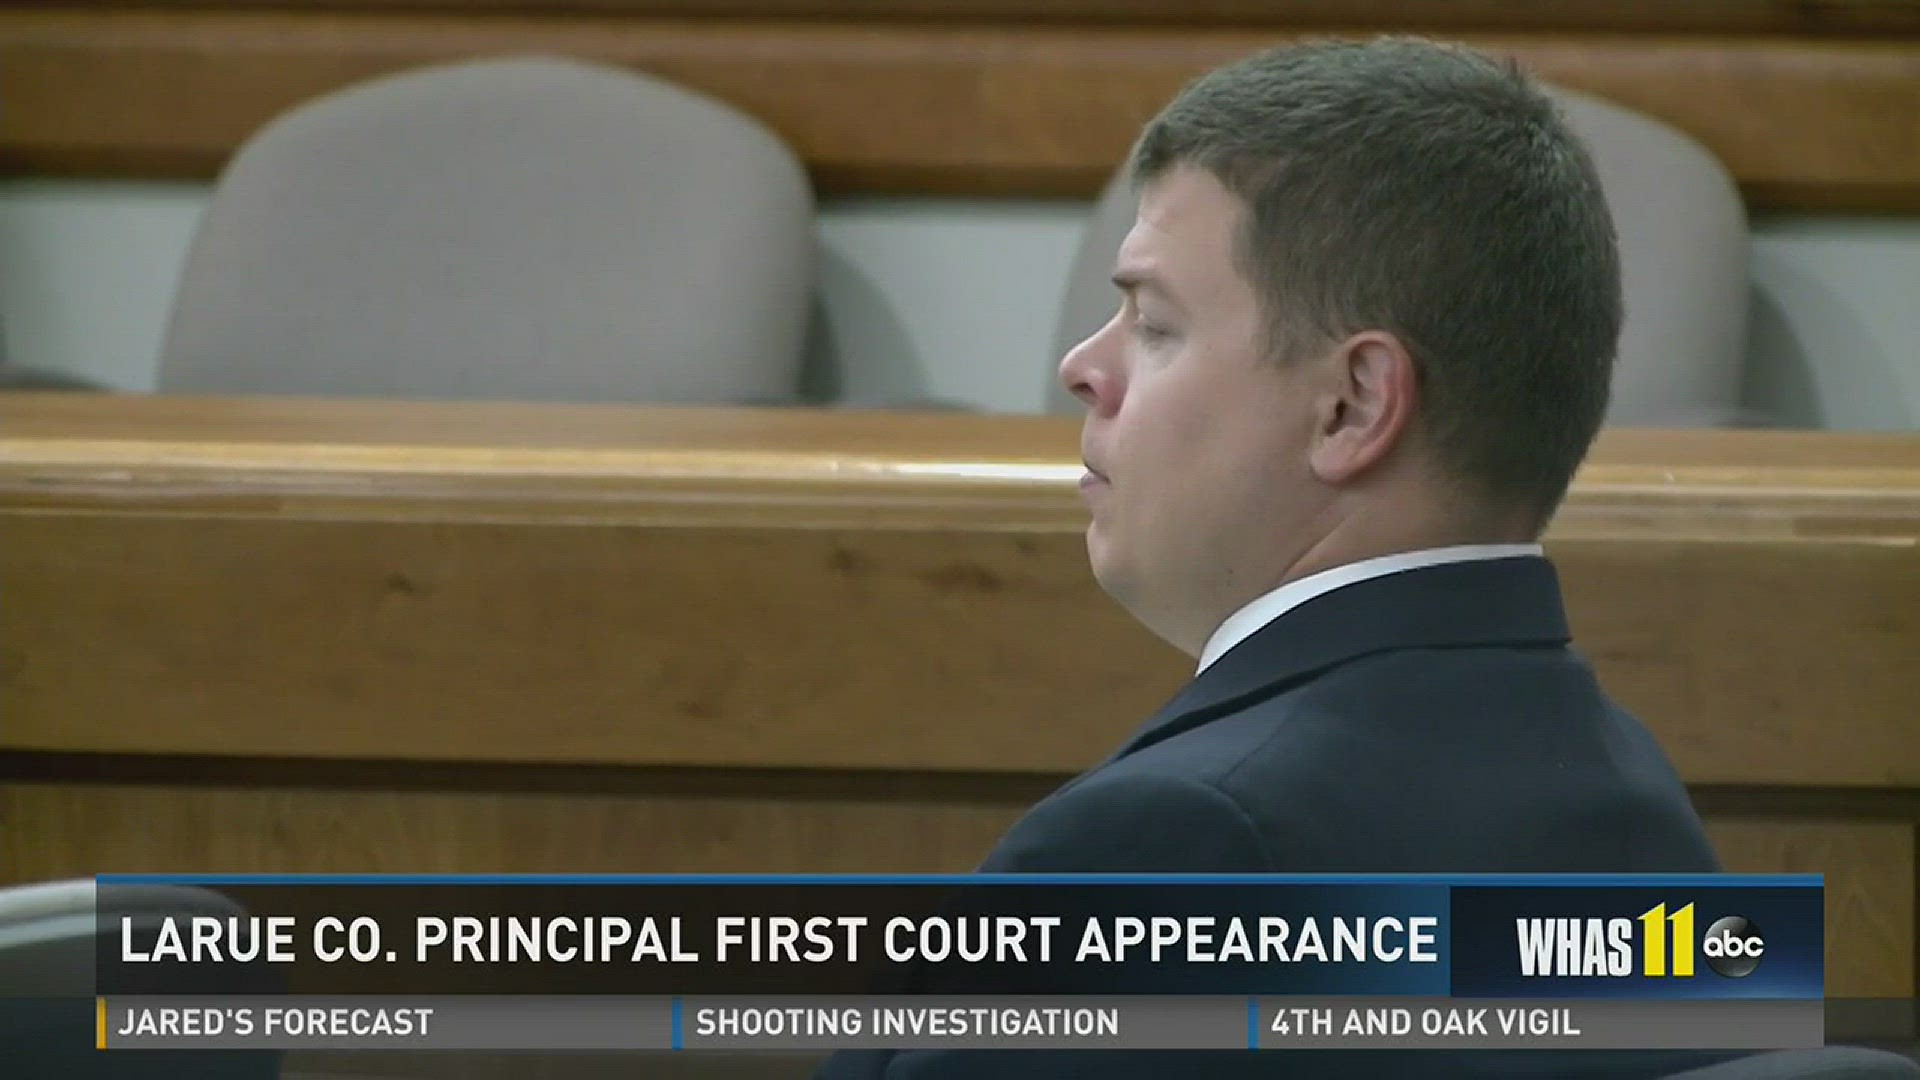 Larue Co. Principal first court appearance